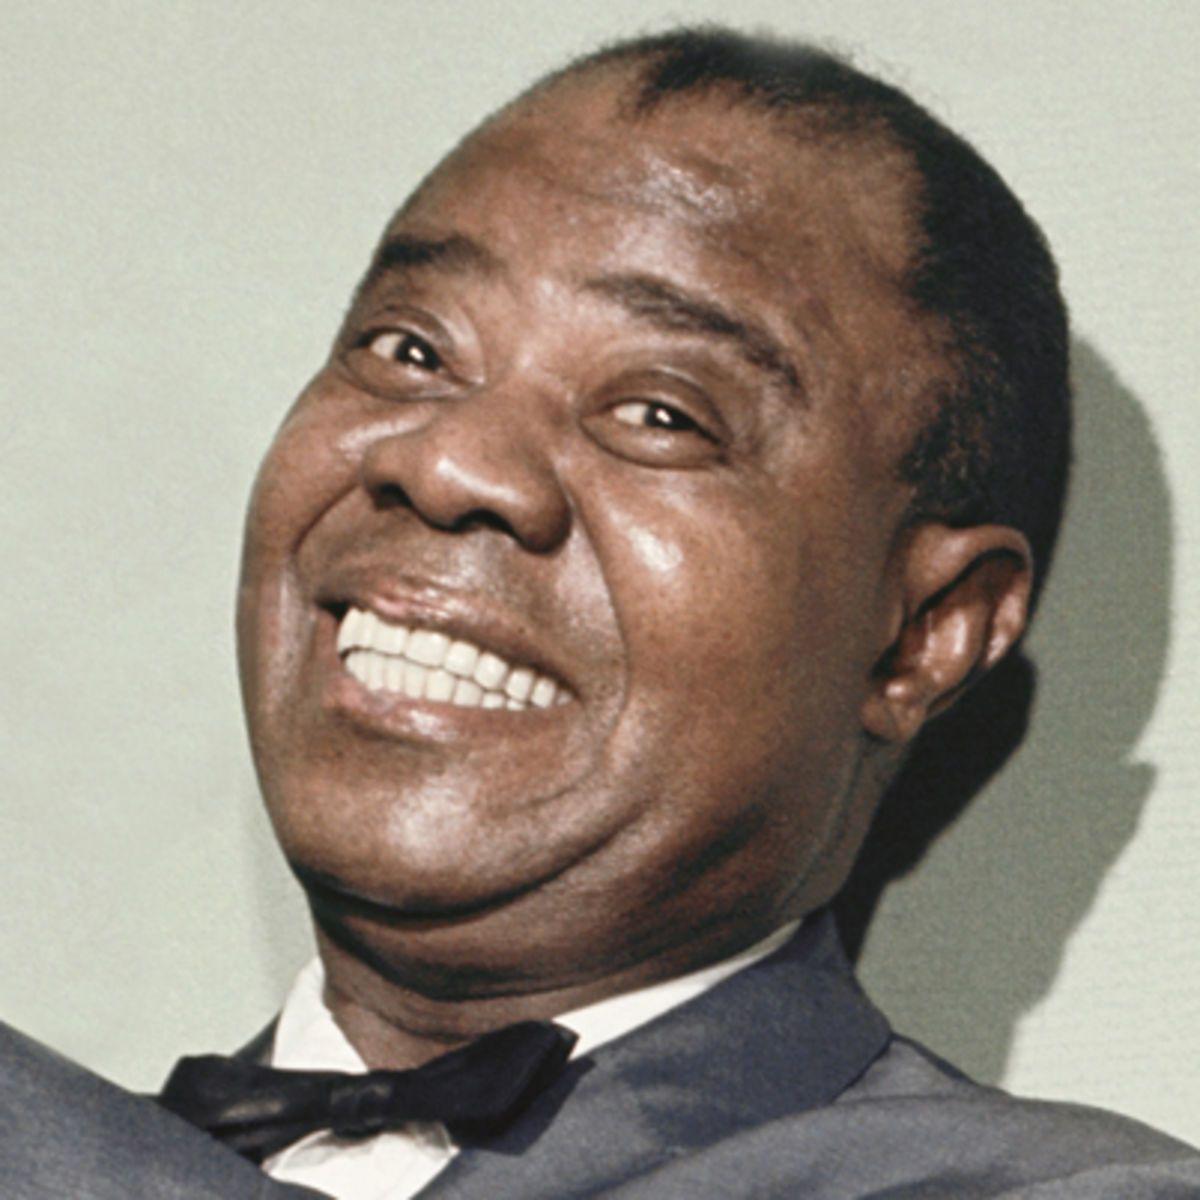 1200x1200px Louis Armstrong 136.19 KB